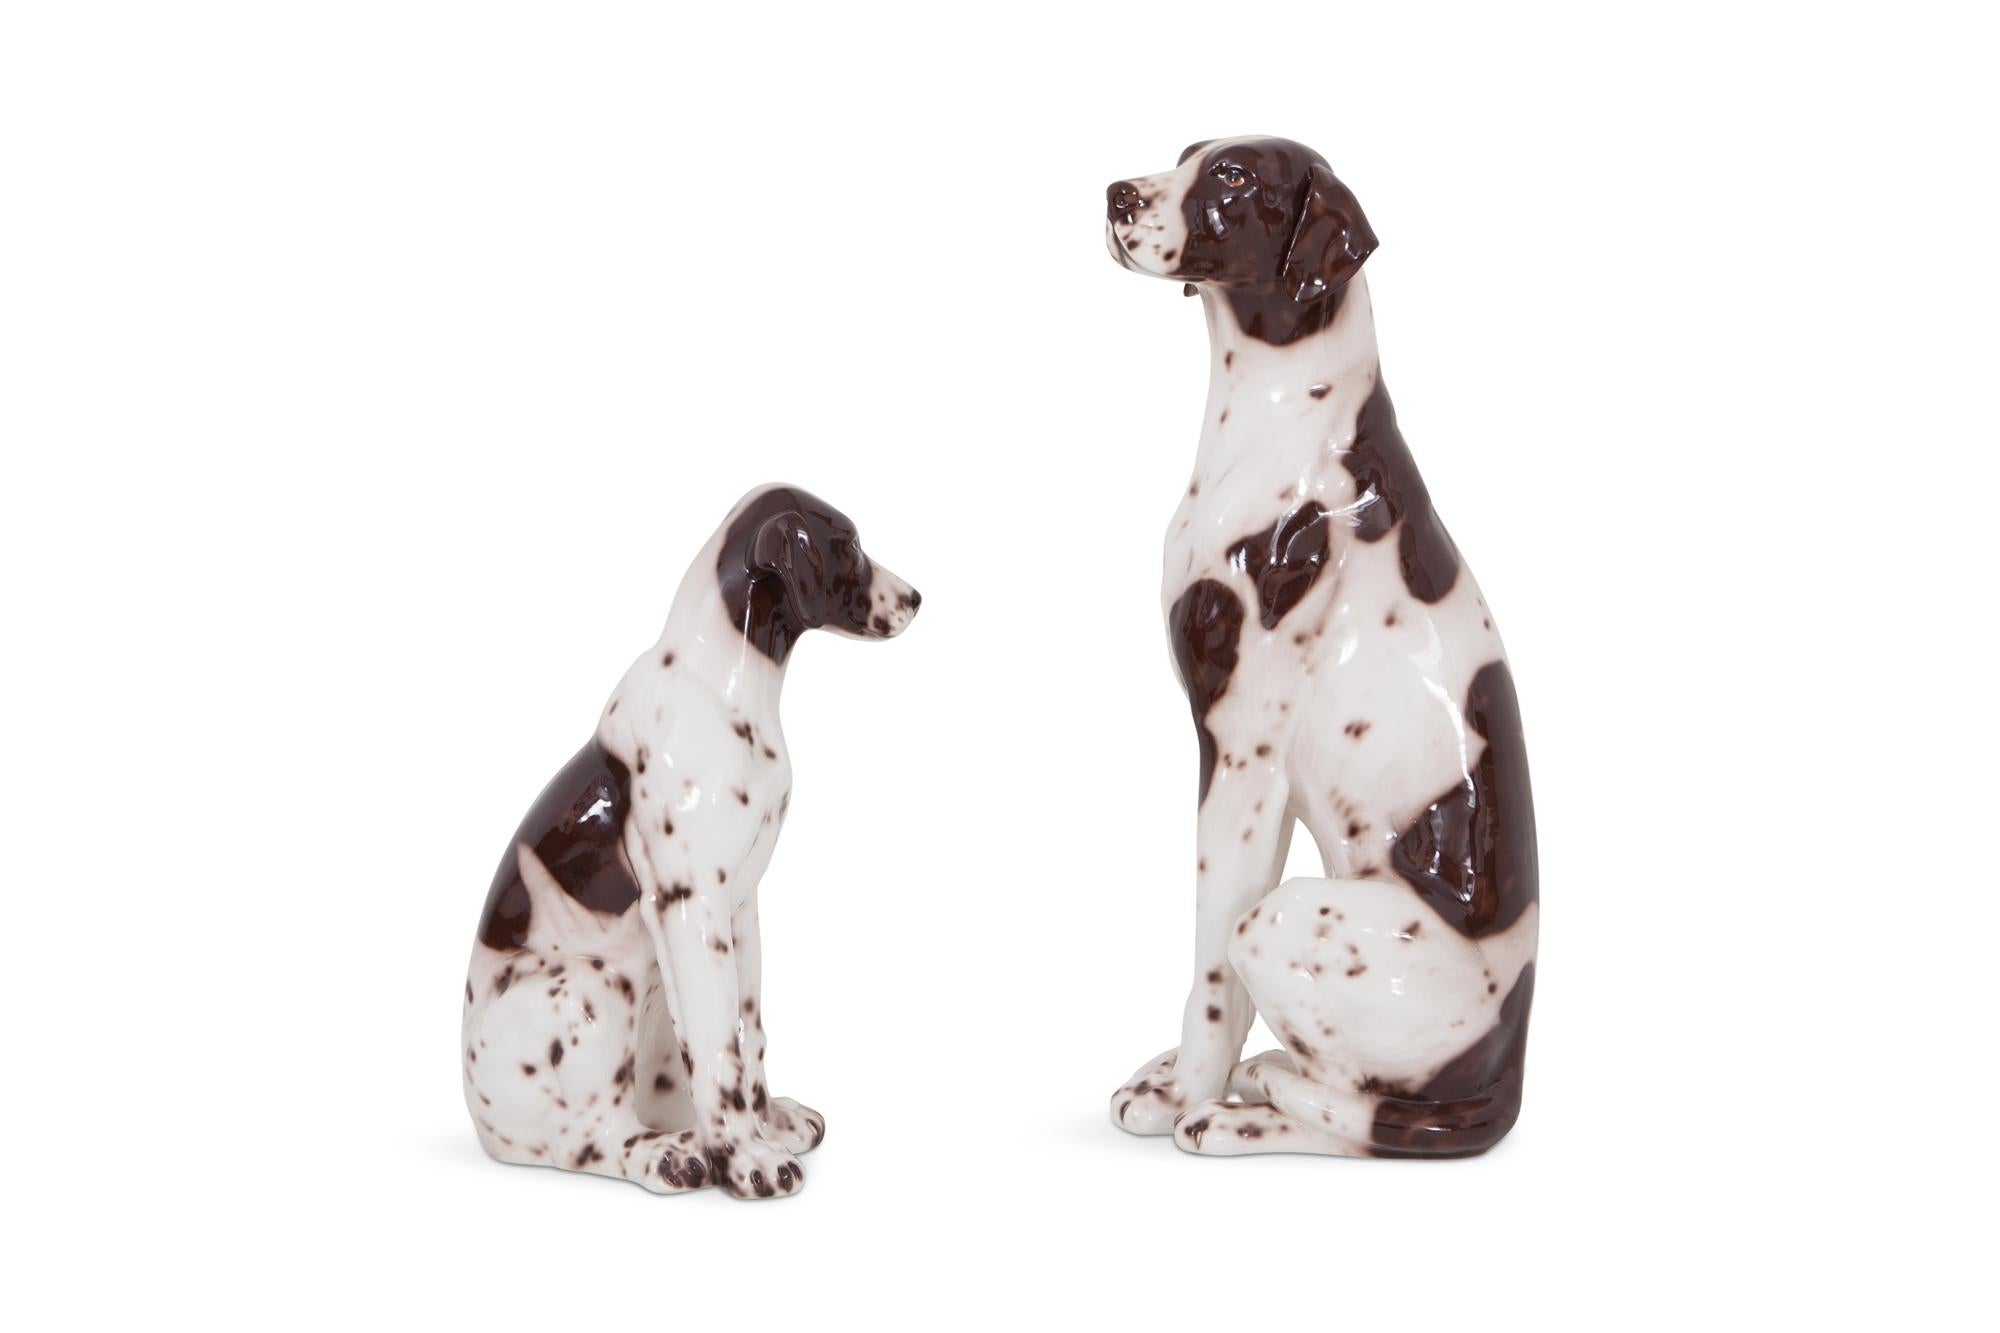 Italian hand painted and glazed ceramic pointer dog sculptures from the 1970s.
Gorgeous set of decorative animal porcelains which display the mother and puppy pointer dog.
Would fit well in a Hollywood Rregency inspired interior.

Measures: